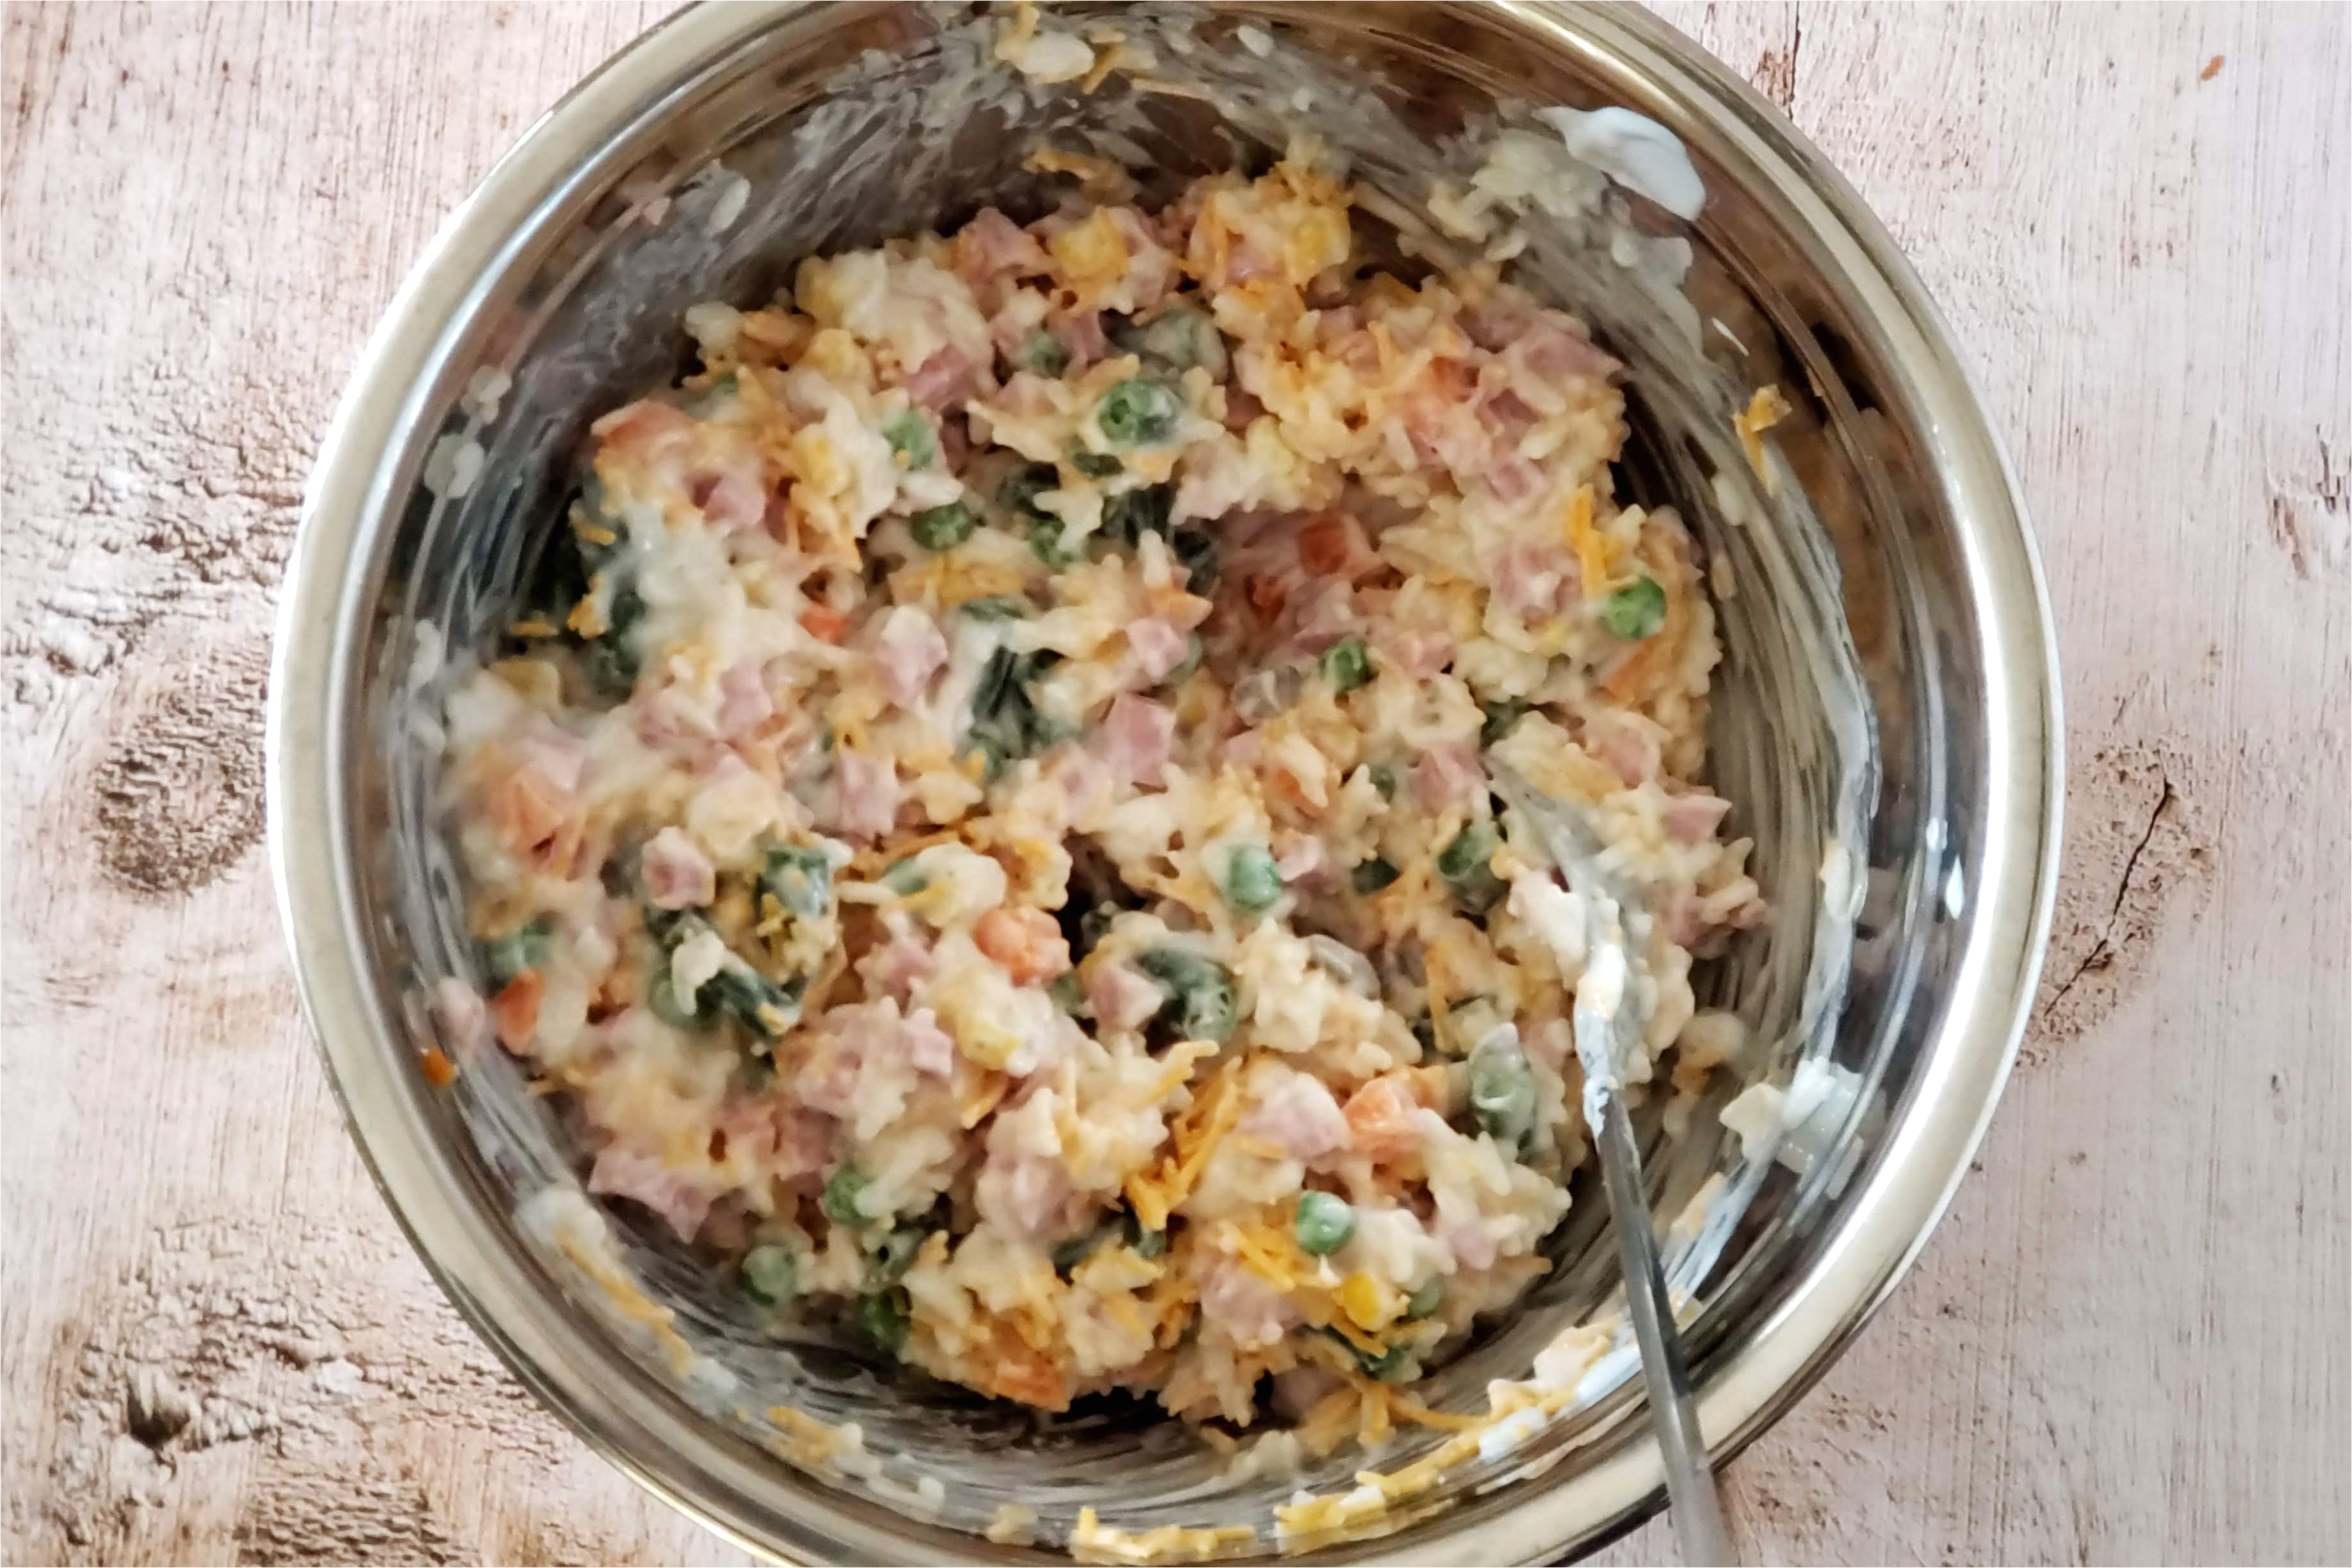 ham and rice bake with cheese and vegetables 3057447 4 5c253c0446e0fb0001aeb410 jpg